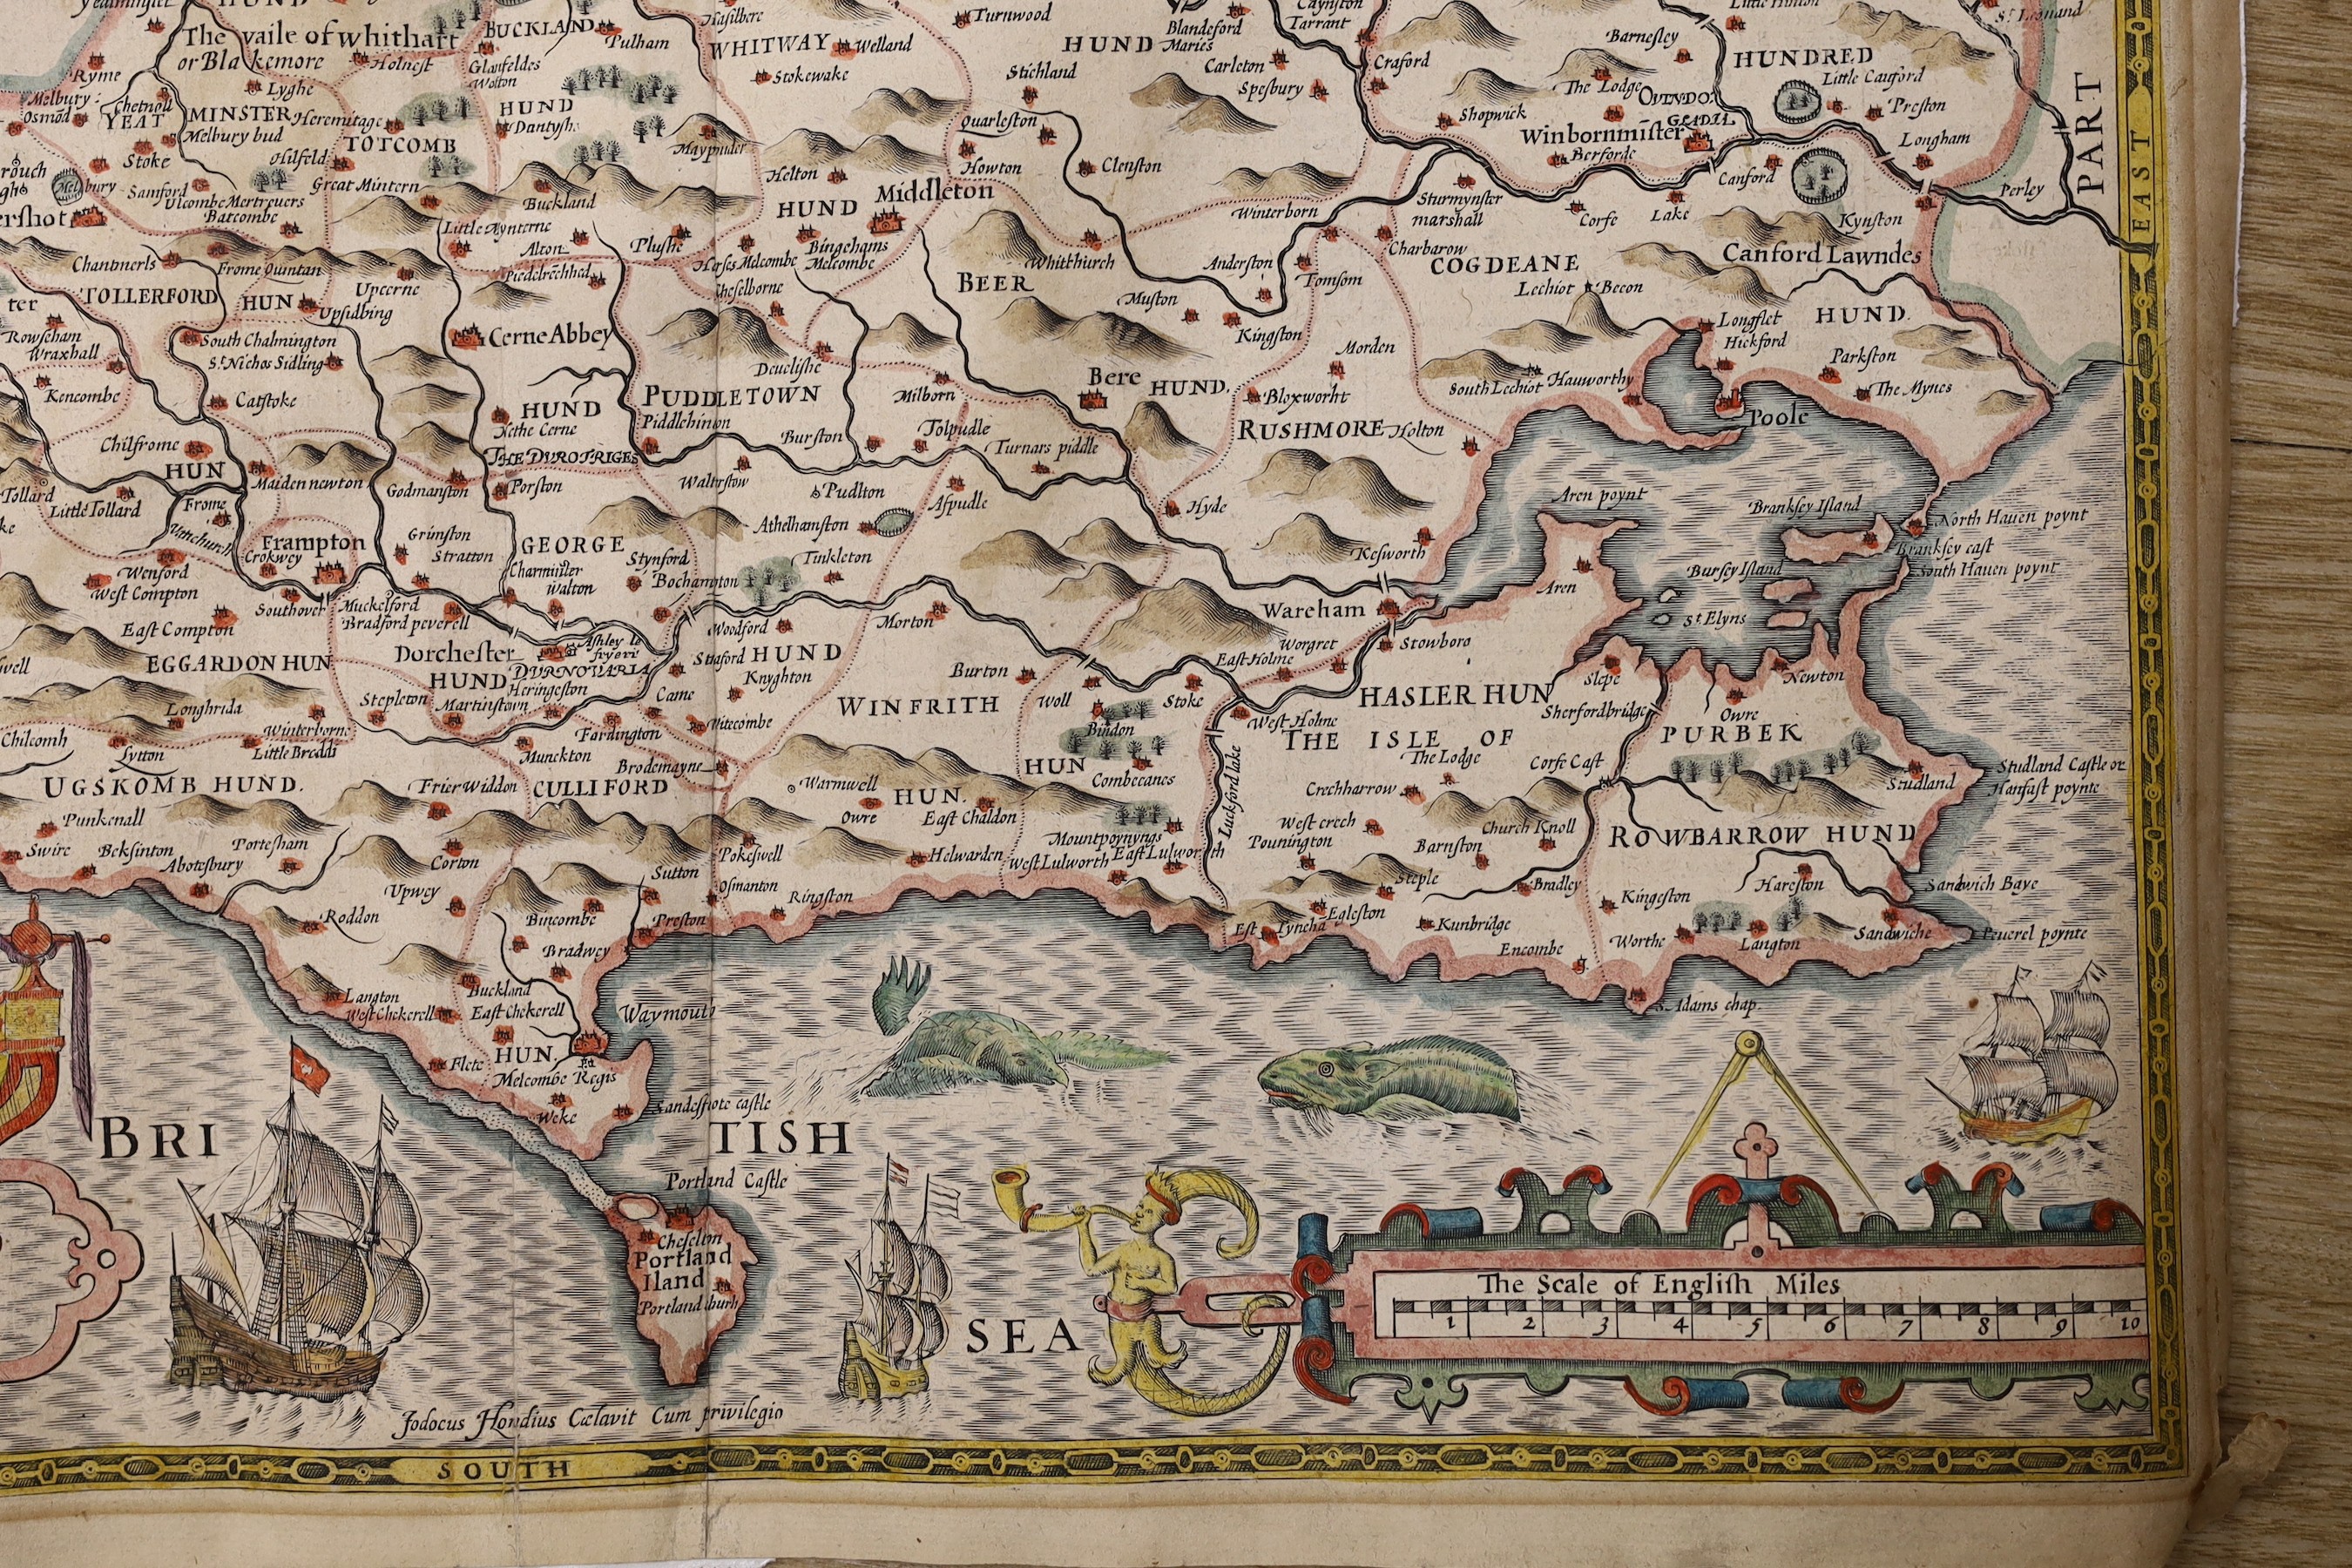 John Speed, (1552-1629) Dorsetshyre, hand coloured map, with the Shire-towne Dorchester described, 40.5cm X 53cm